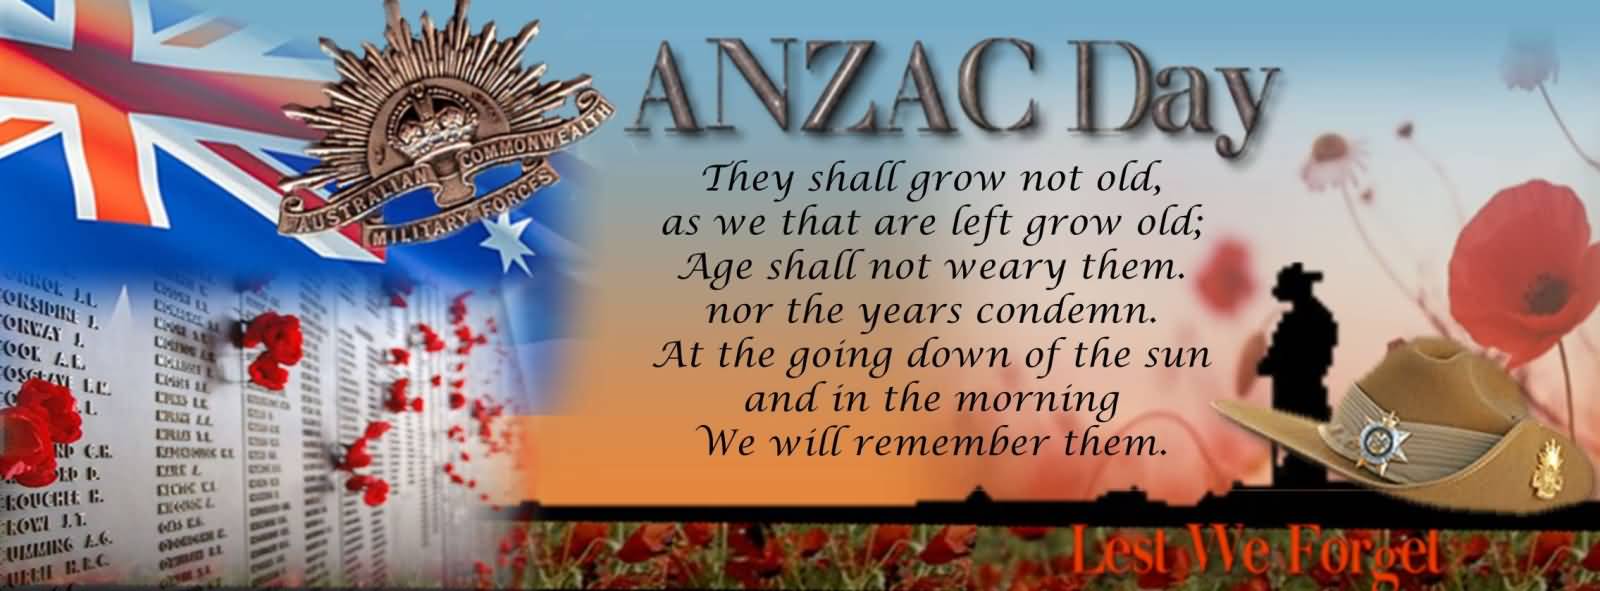 Anzac Day Lest We Forget Card